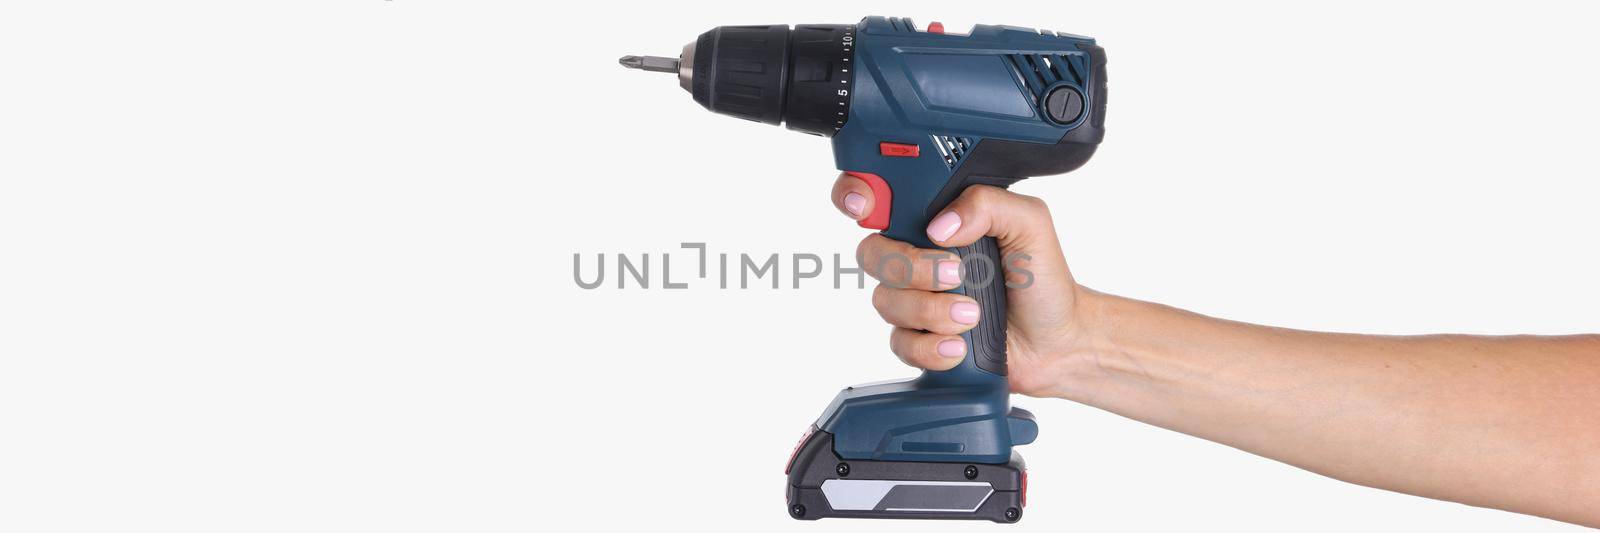 Close-up of woman hand holding electric cordless drill, foreman equipment for work, tool for repair and fix things, screw gun. Construction renovation instrument, screwdriver concept